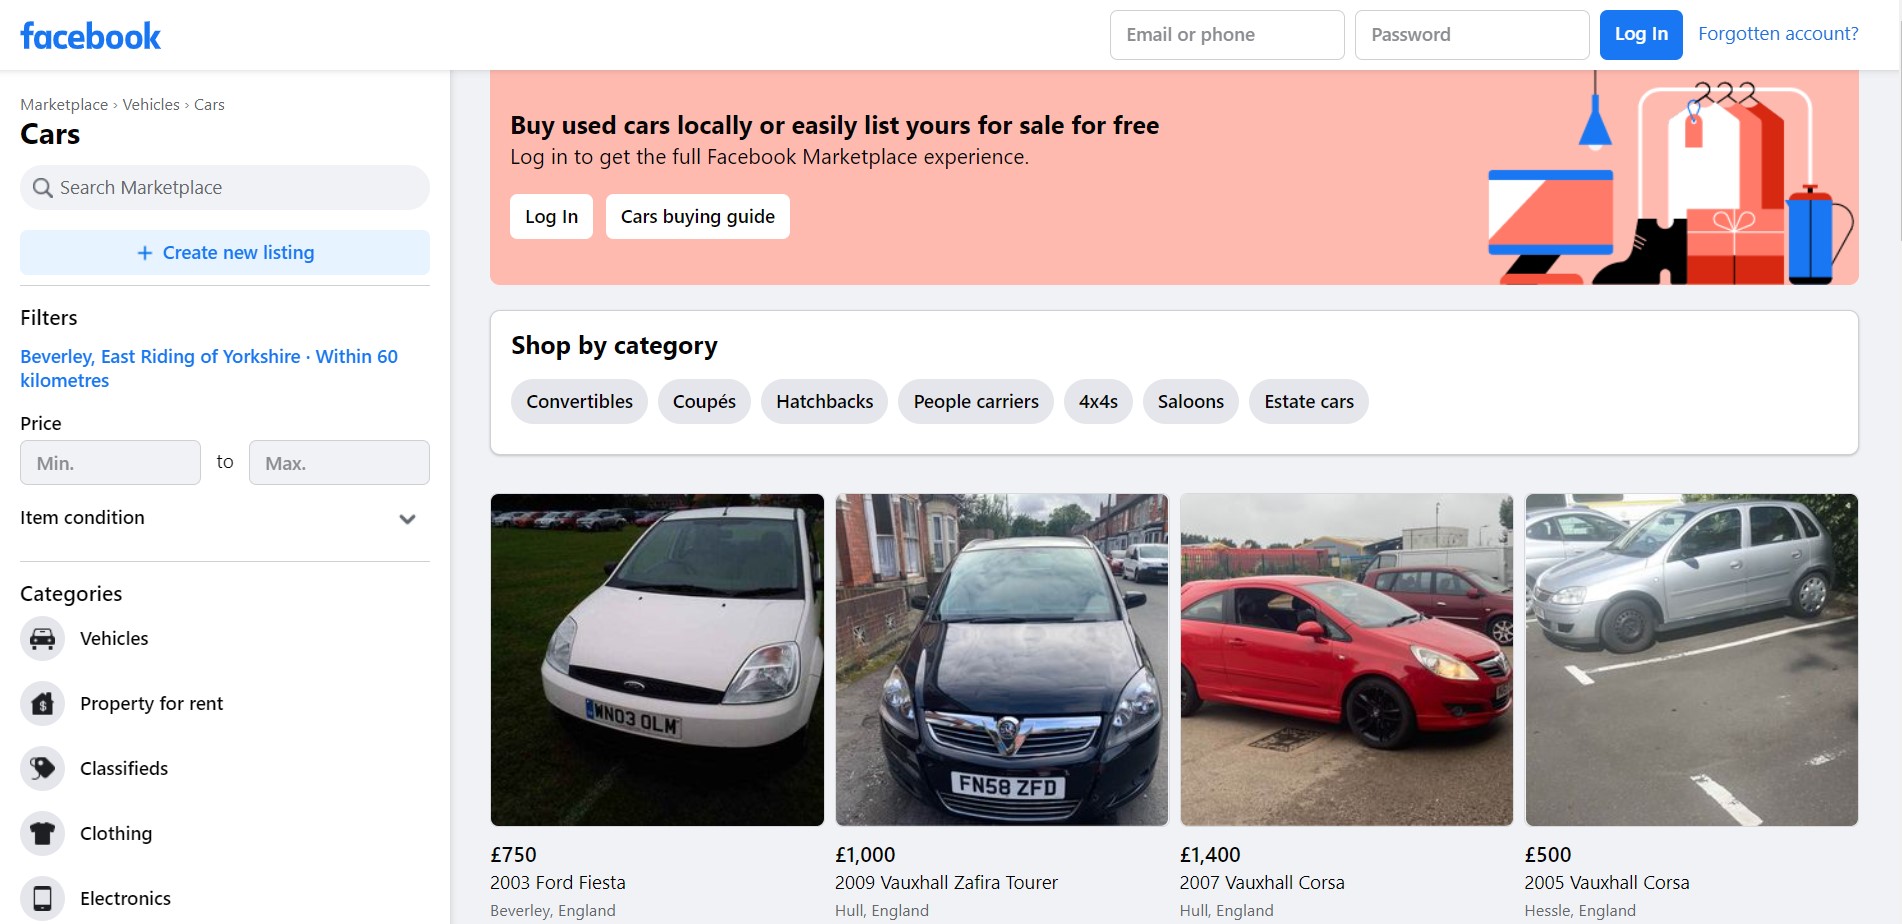 Explained in 60 Seconds: Facebook Marketplace for Auto Dealers